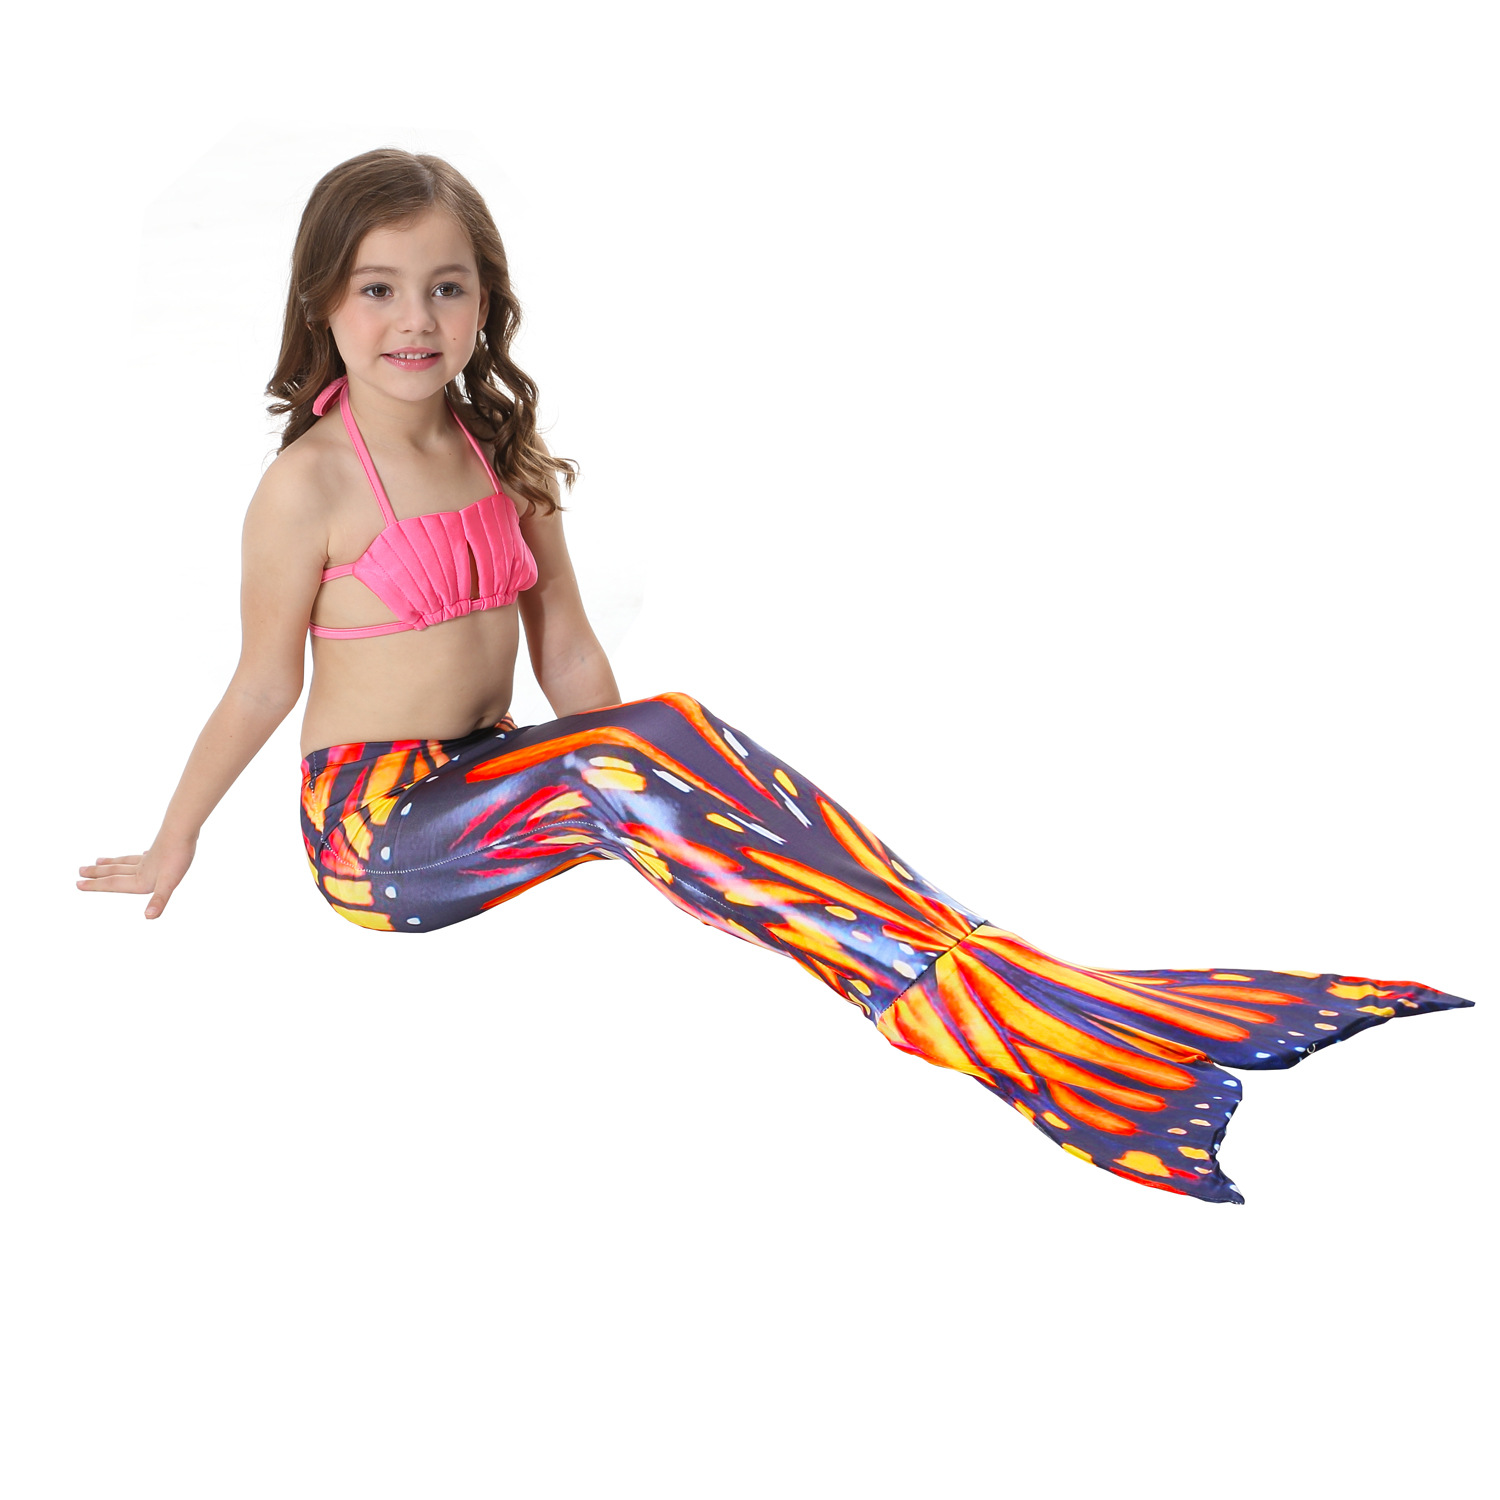 Fun-Mermaid-Tails-Swimming-Clothes-Gift-Best-Cosplay-Princess-Doll-Party-Dress-Gown-Skirts-1298569-6